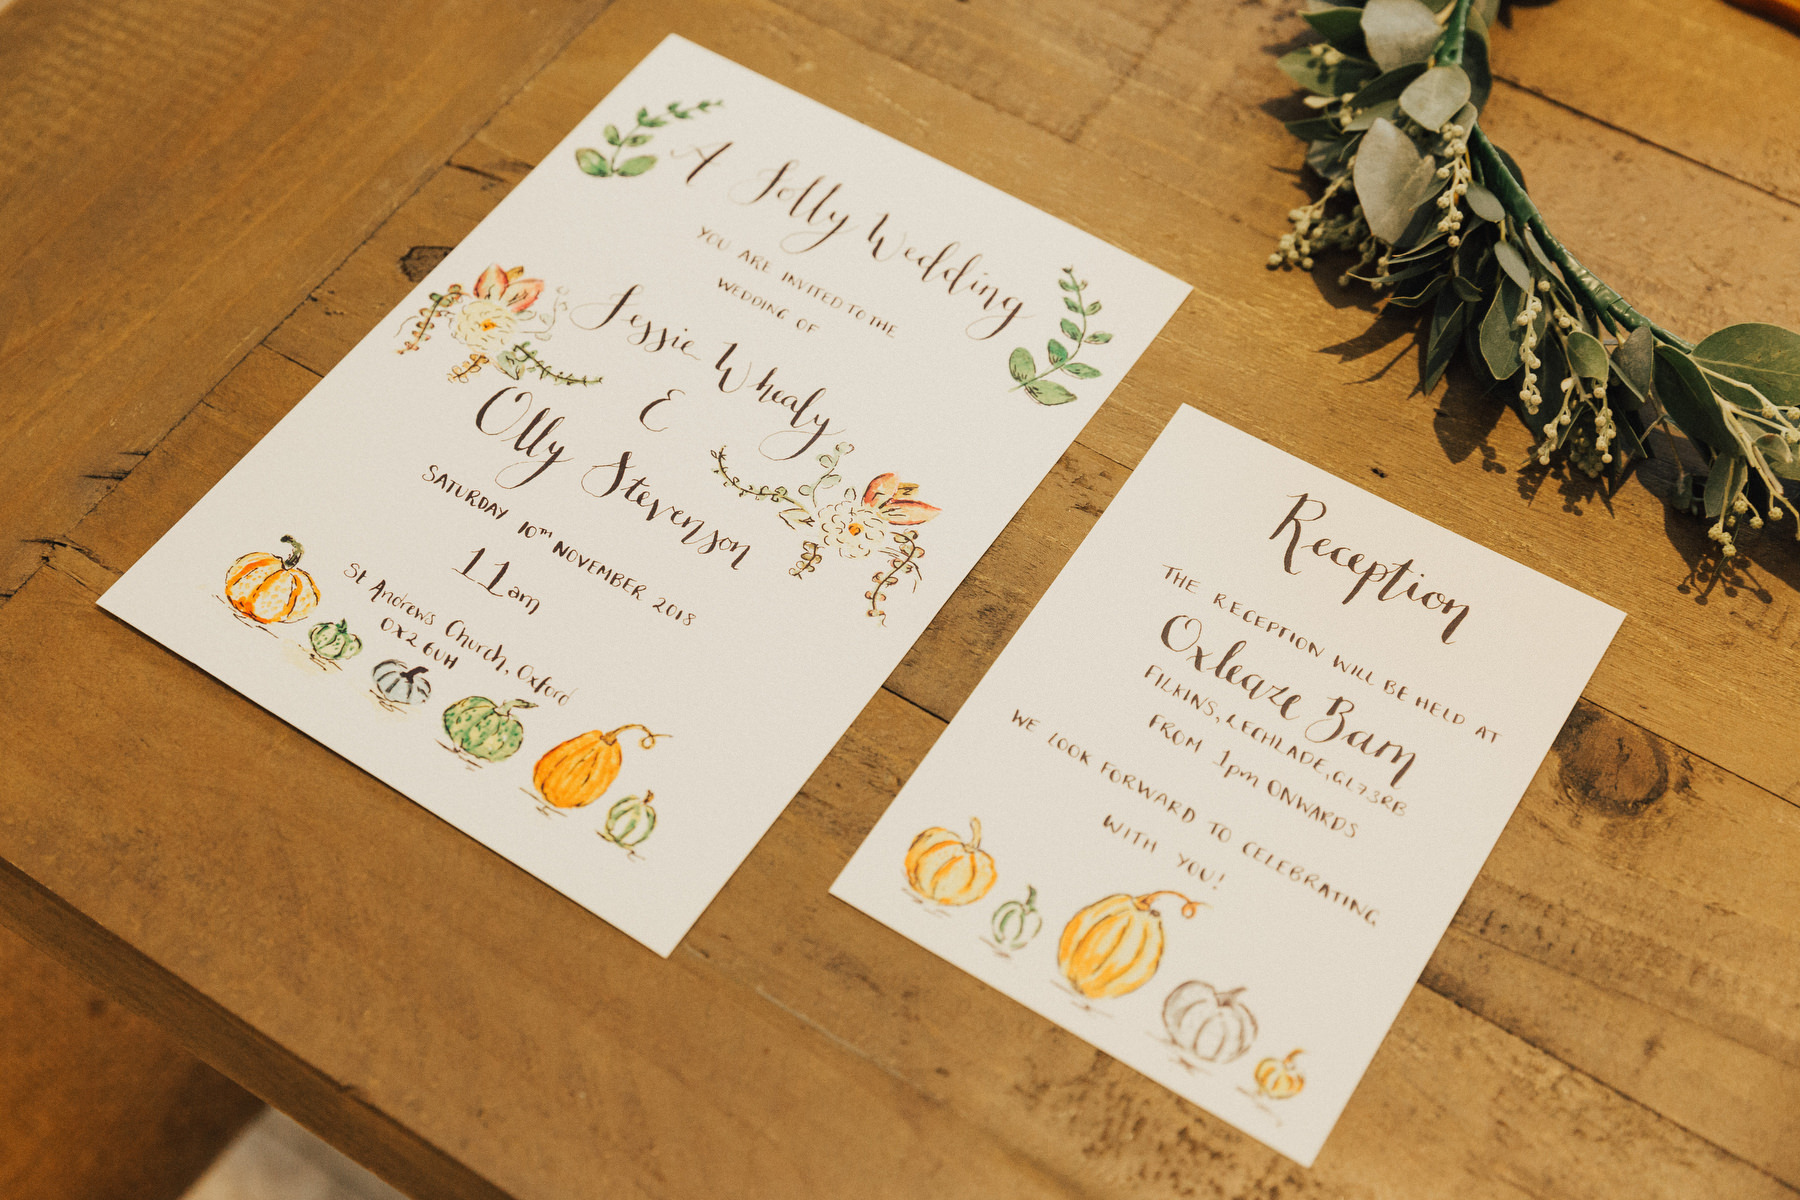 The wedding stationery showed off some handpainted pumpkins